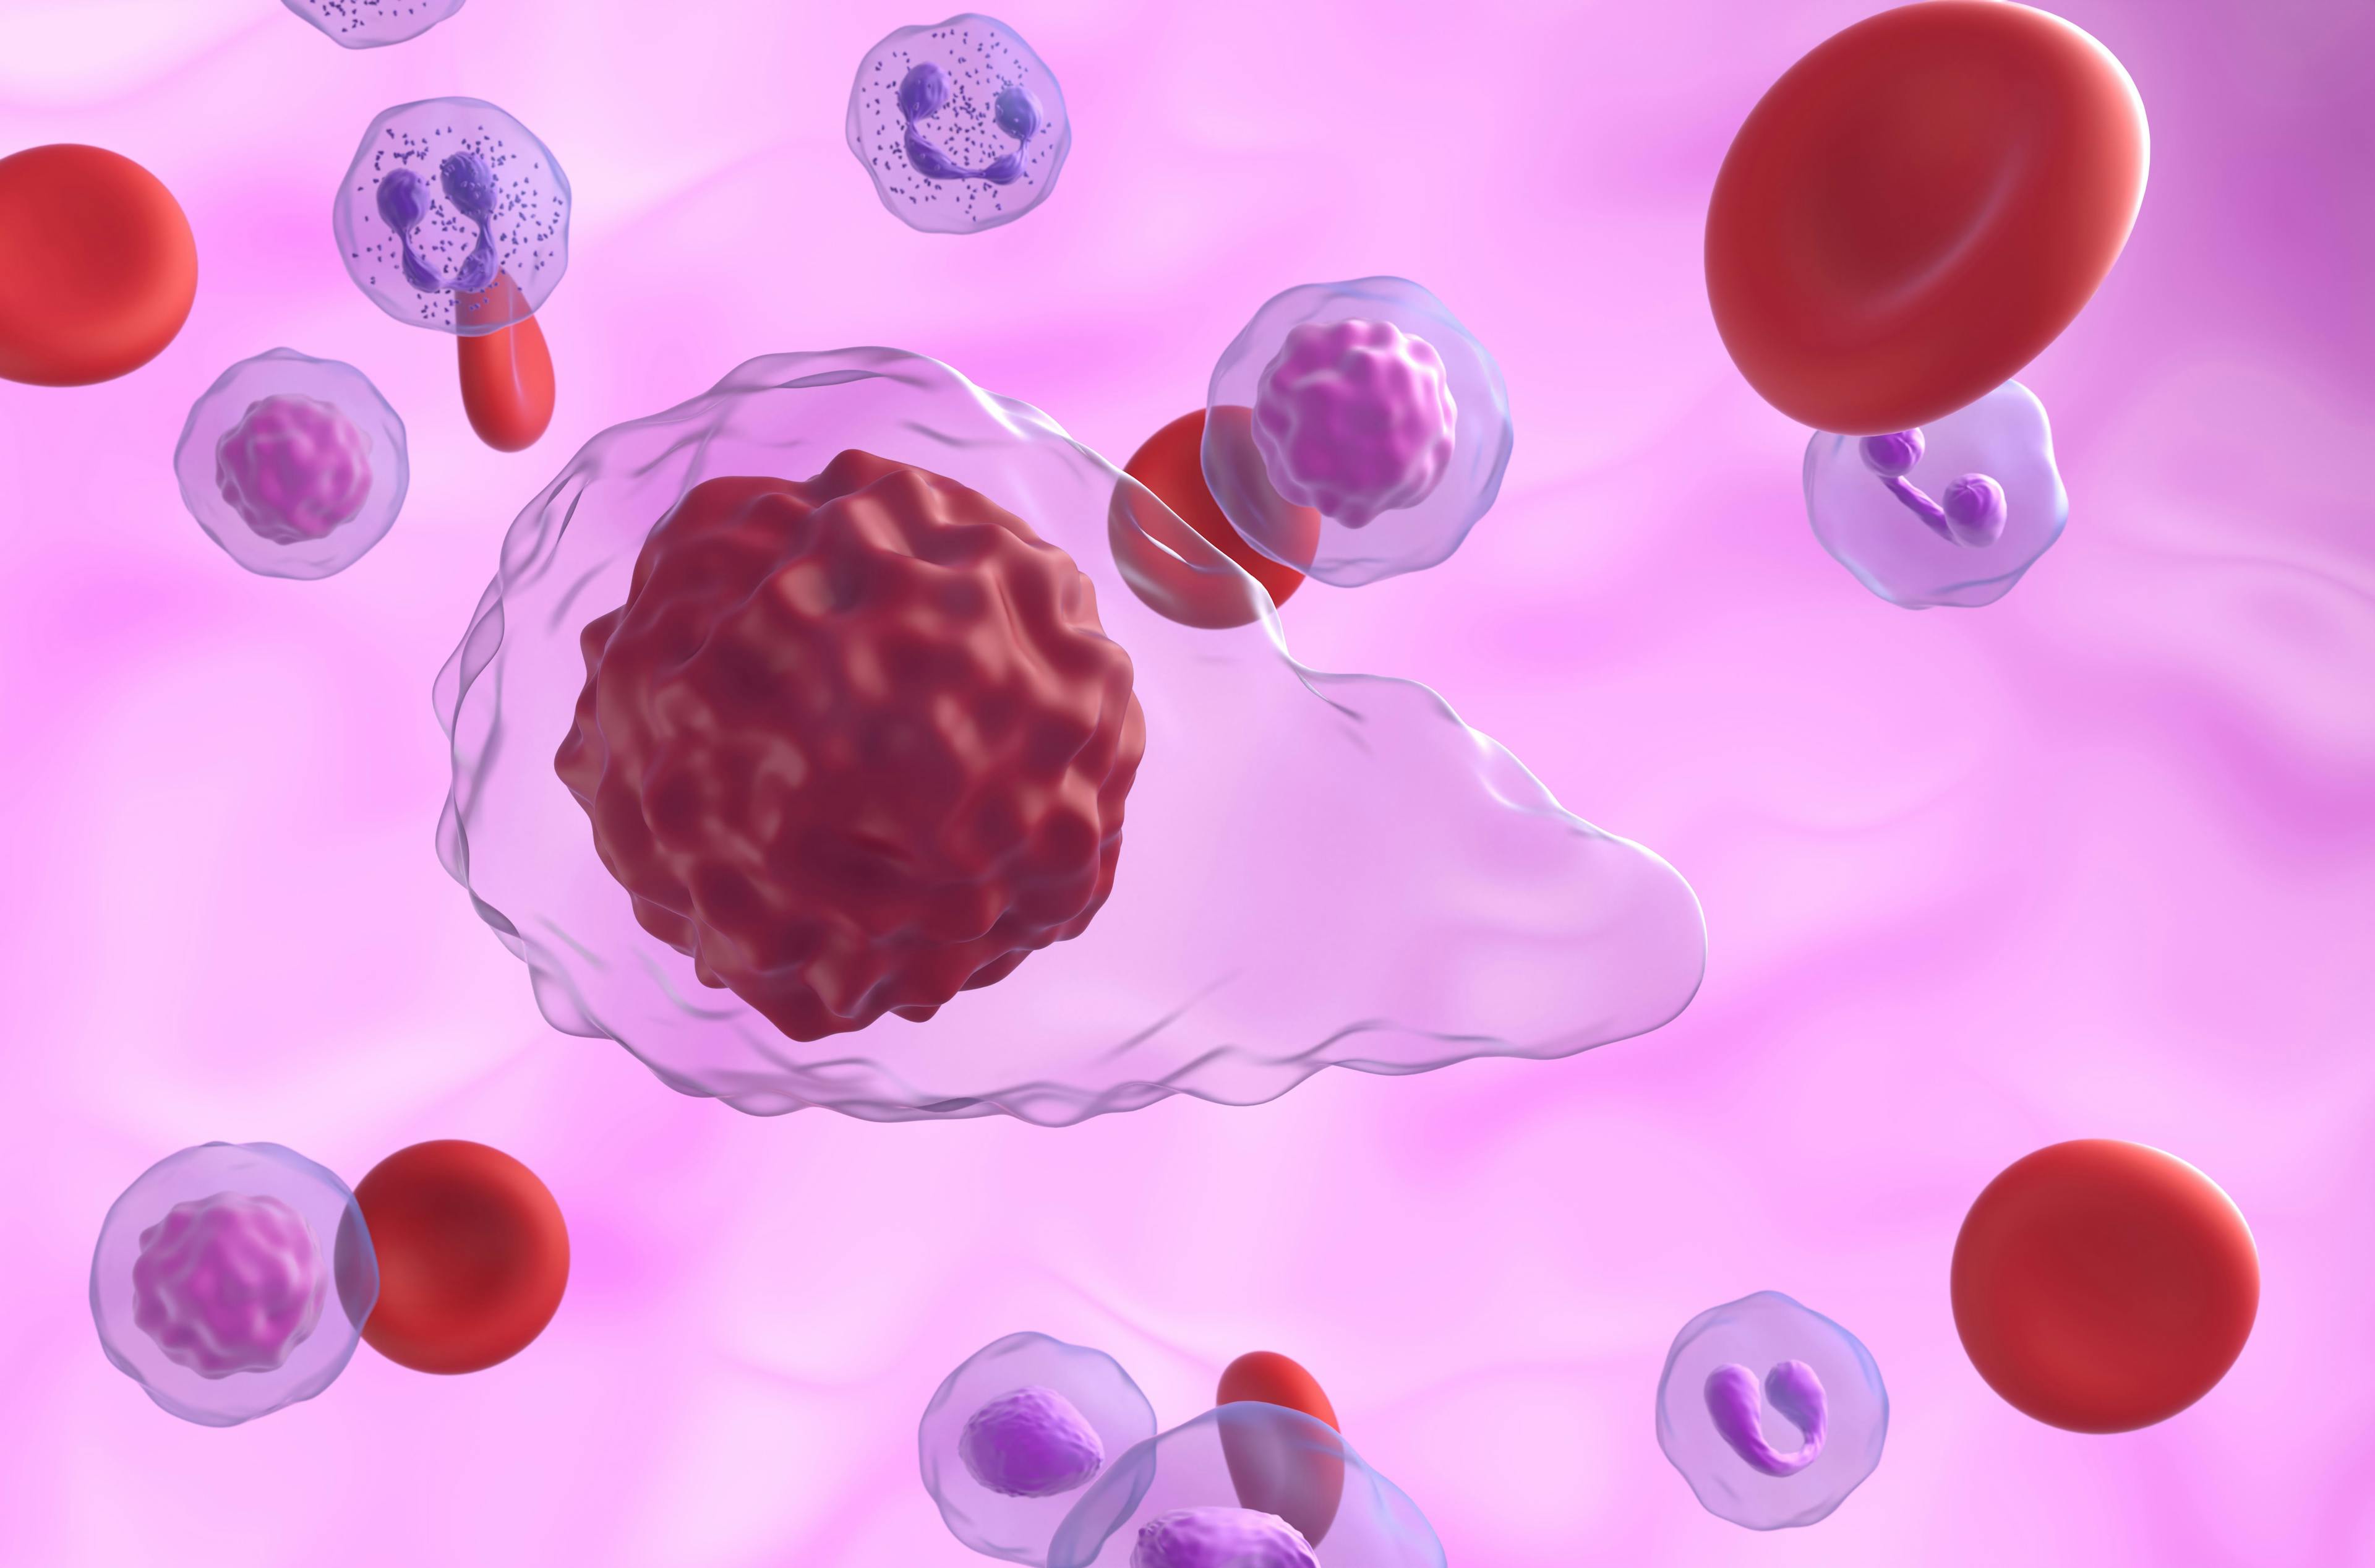 Primary myelofibrosis (PMF) cells in blood flow - closeup view 3d illustration: © LASZLO - stock.adobe.comNormal